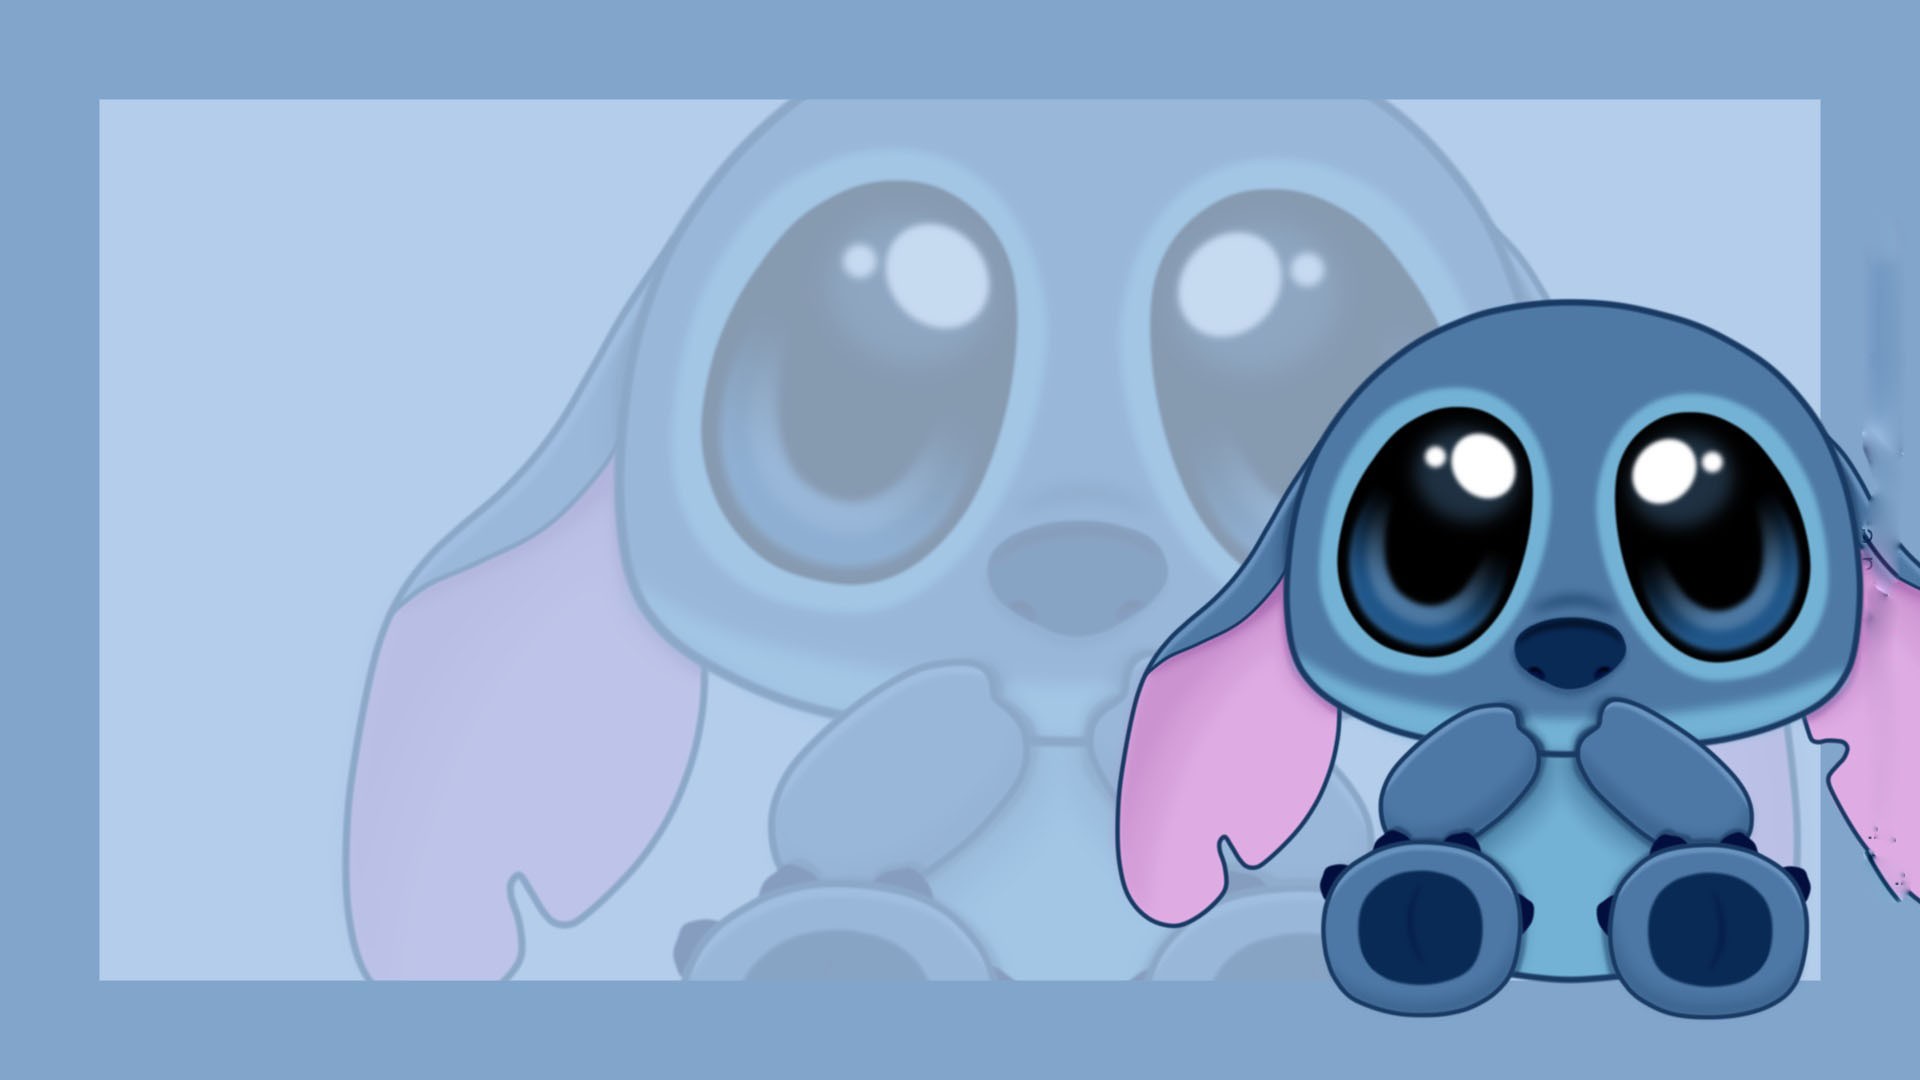  Stitch  wallpaper    Download free cool wallpapers  for 